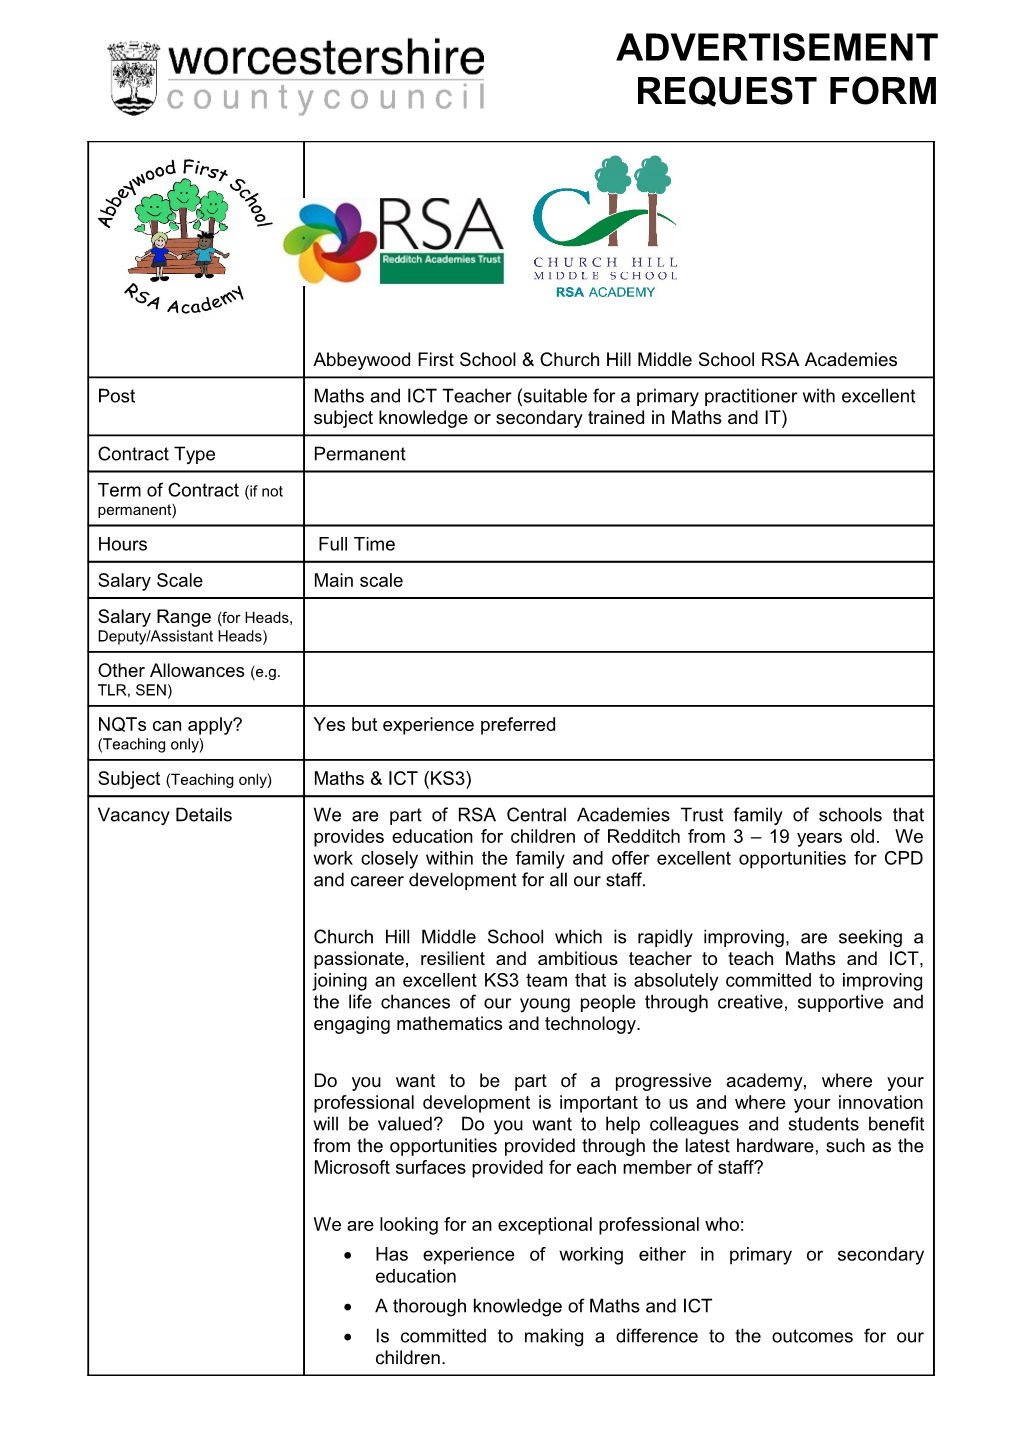 Form to Send to SES for Advertising Teaching and Support Staff Vacancies